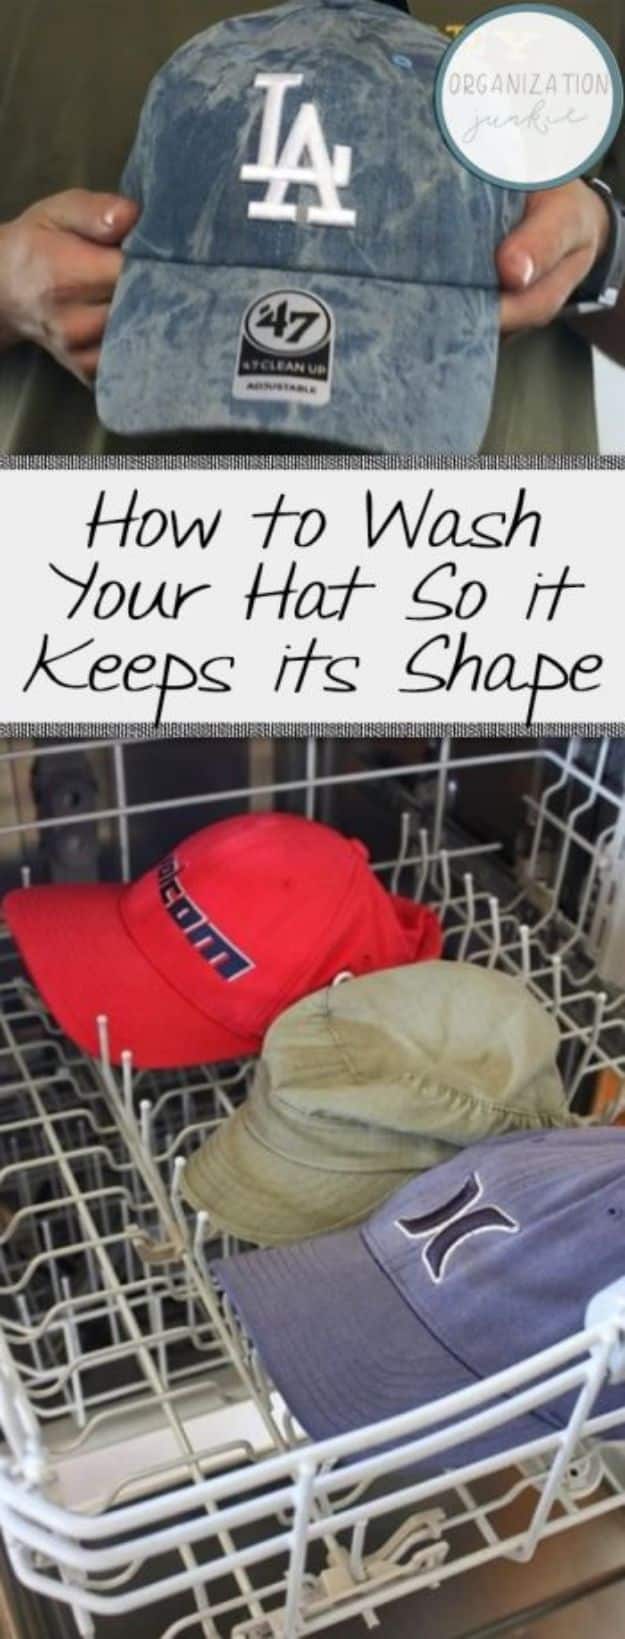 Laundry Hacks - Wash Your Hat So it Keeps its Shape - Cool Tips for Busy Moms and Laundry Lifehacks - Laundry Room Organizing Ideas, Storage and Makeover - Folding, Drying, Cleaning and Stain Removal Tips for Clothes - How to Remove Stains, Paint, Ink and Smells - Whitening Tricks and Solutions - DIY Products and Recipes for Clothing Soaps 